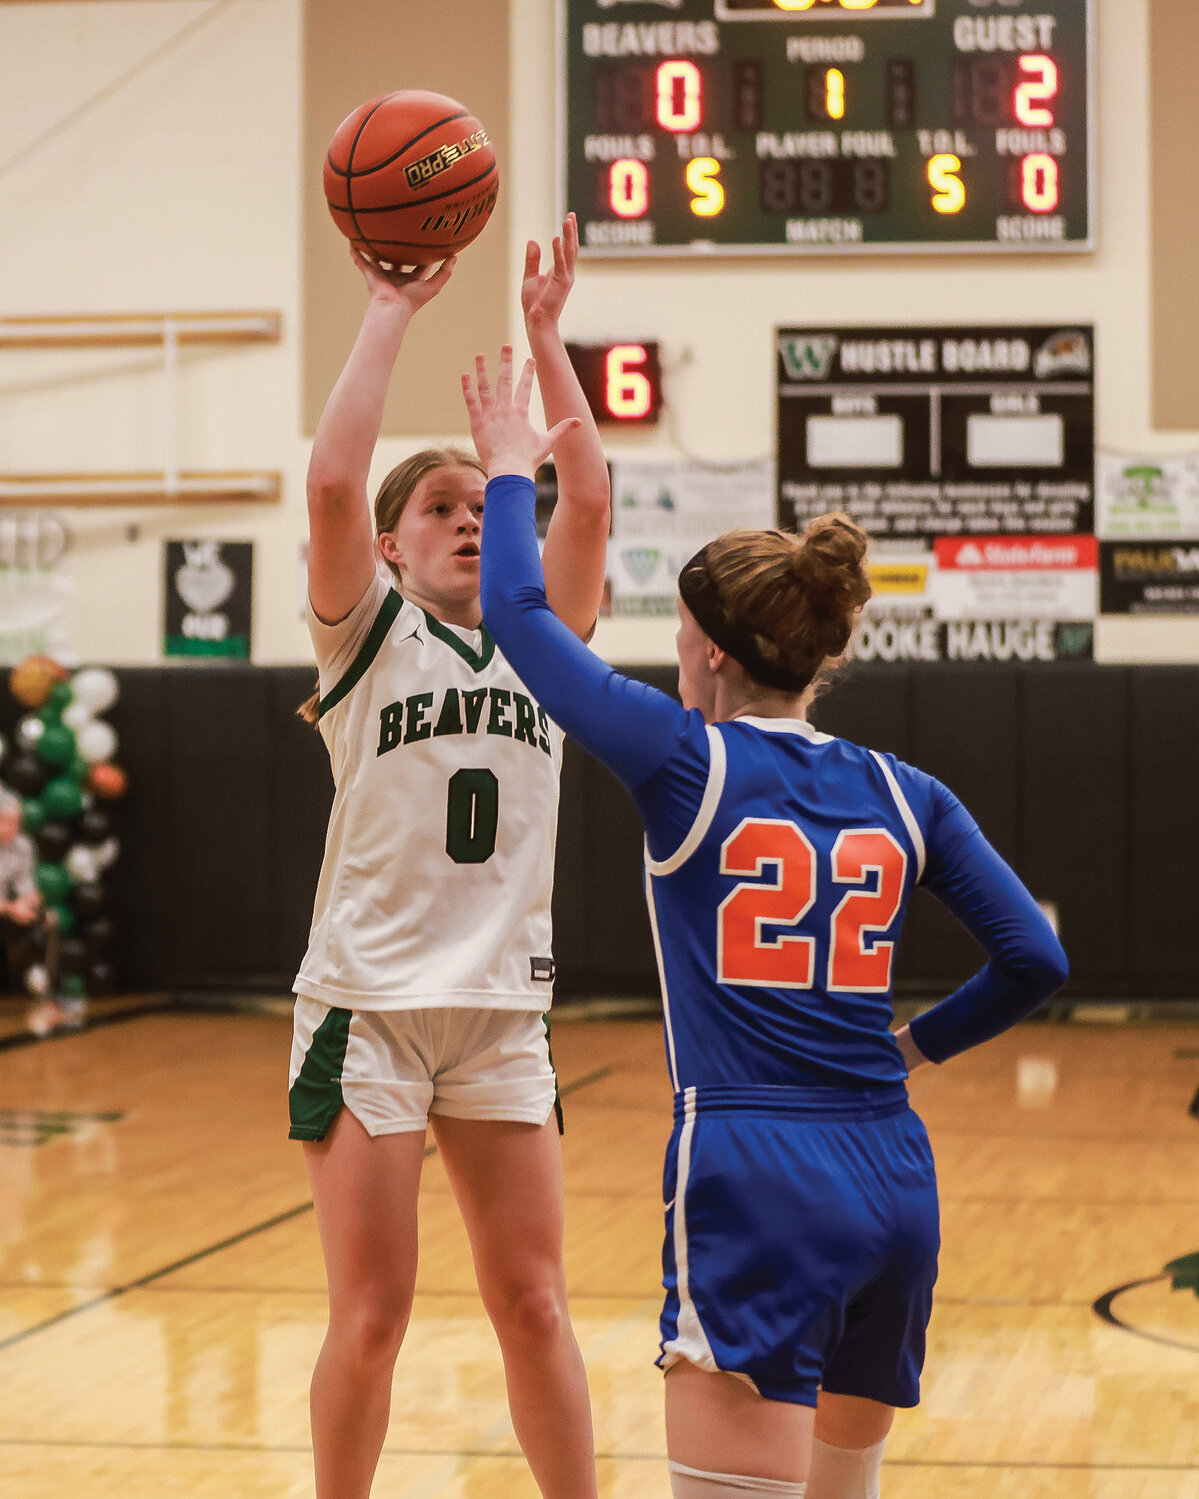 Woodland's Addi Stading takes a shot over Ridgefield’s Elizabeth Swift early in the Beavers’ 57-45 loss to Ridgefield on Friday, Feb. 2.